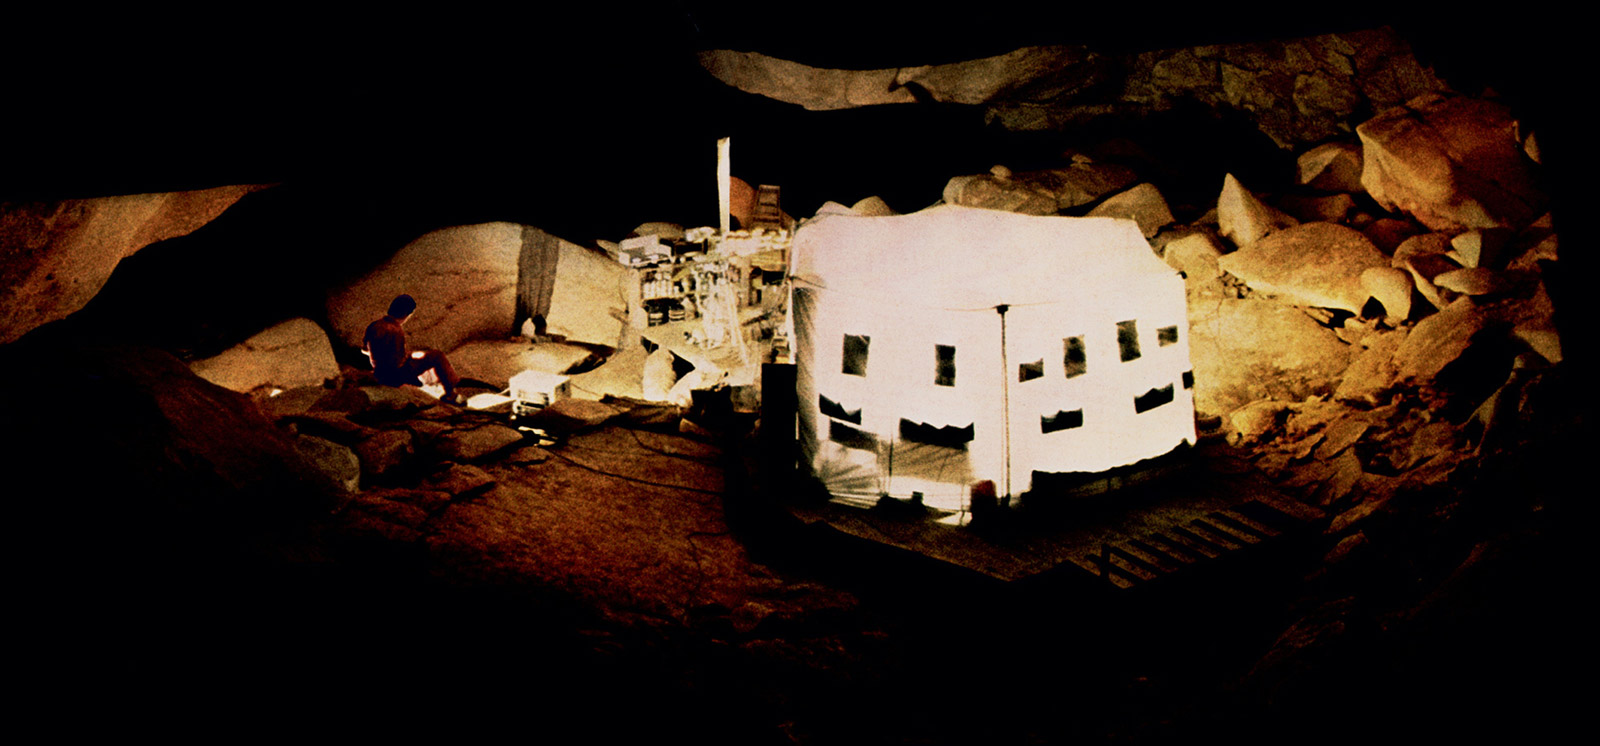 Michel Siffre’s tent in Midnight Cave, Texas, glows with incandescent lights. All images from Siffre’s 1972 experiment in Texas.